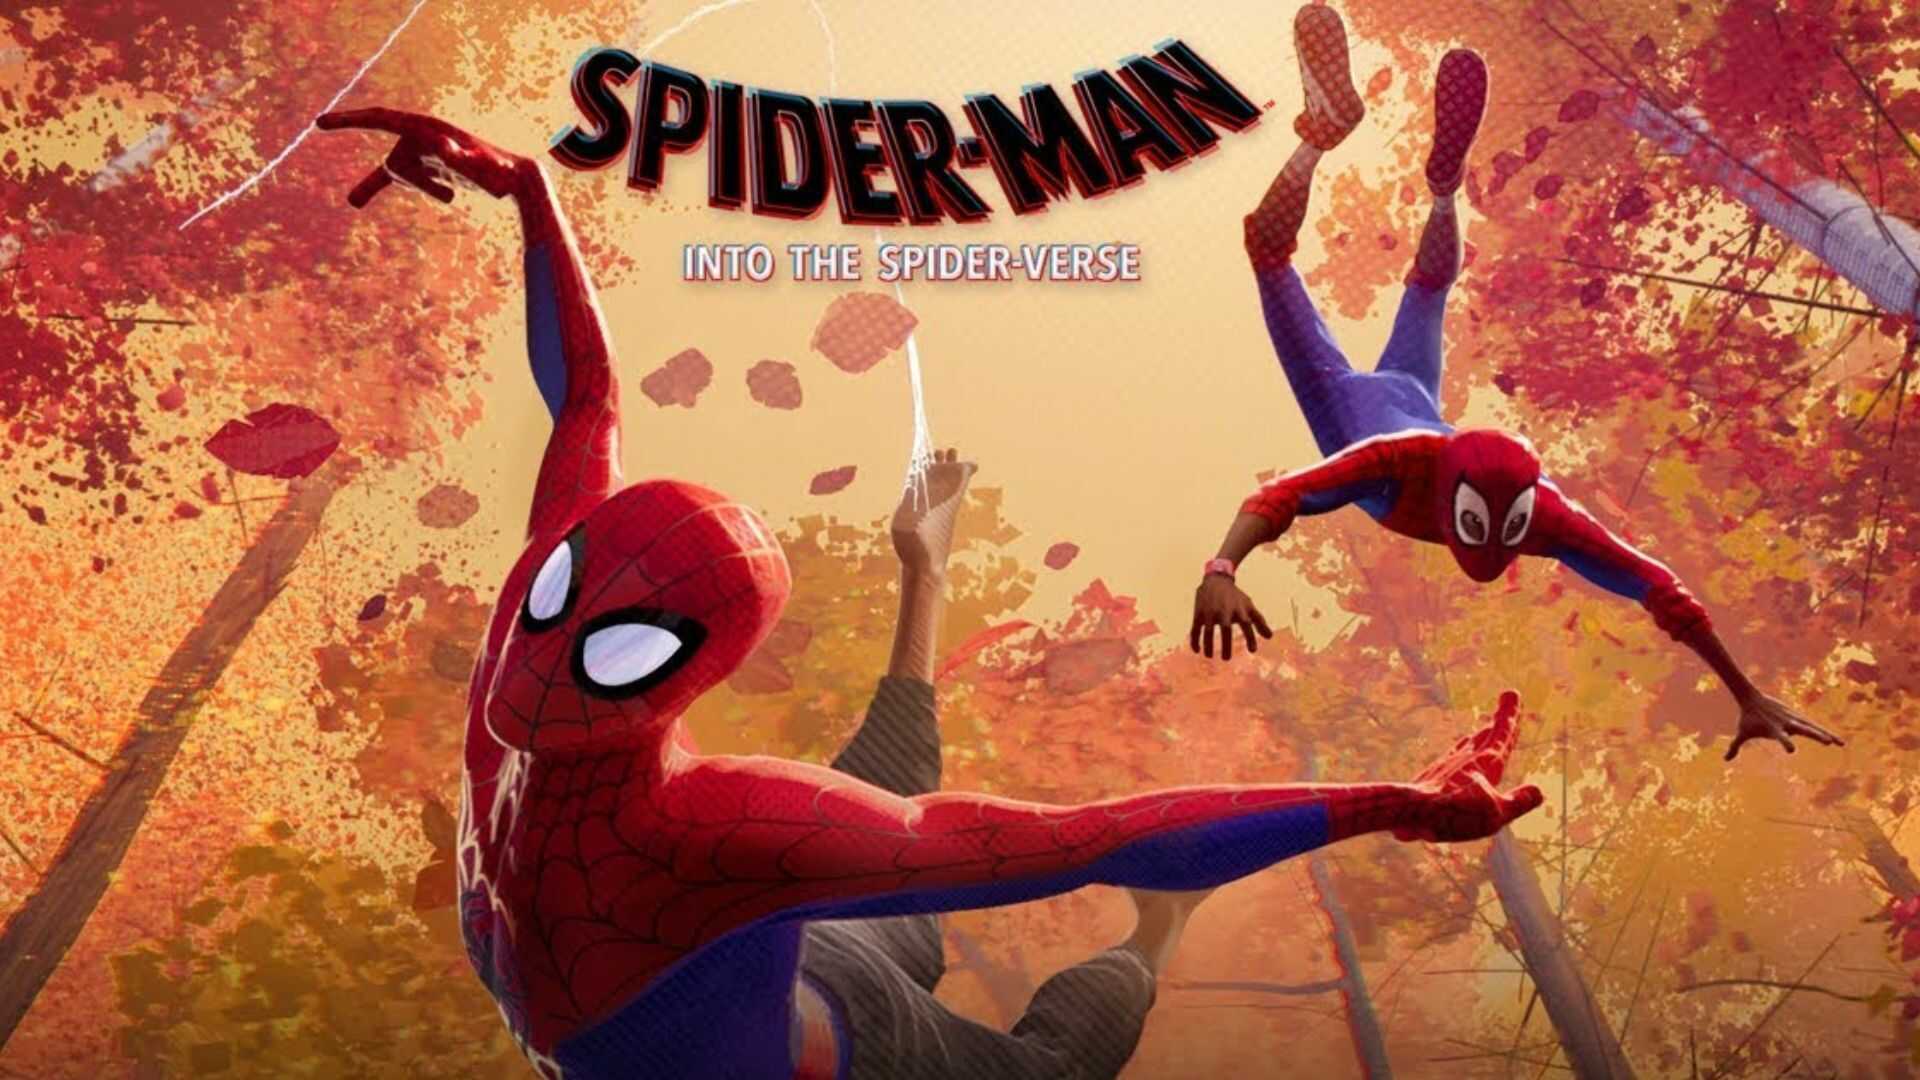 Spiderman: Did the animation split into before and after?